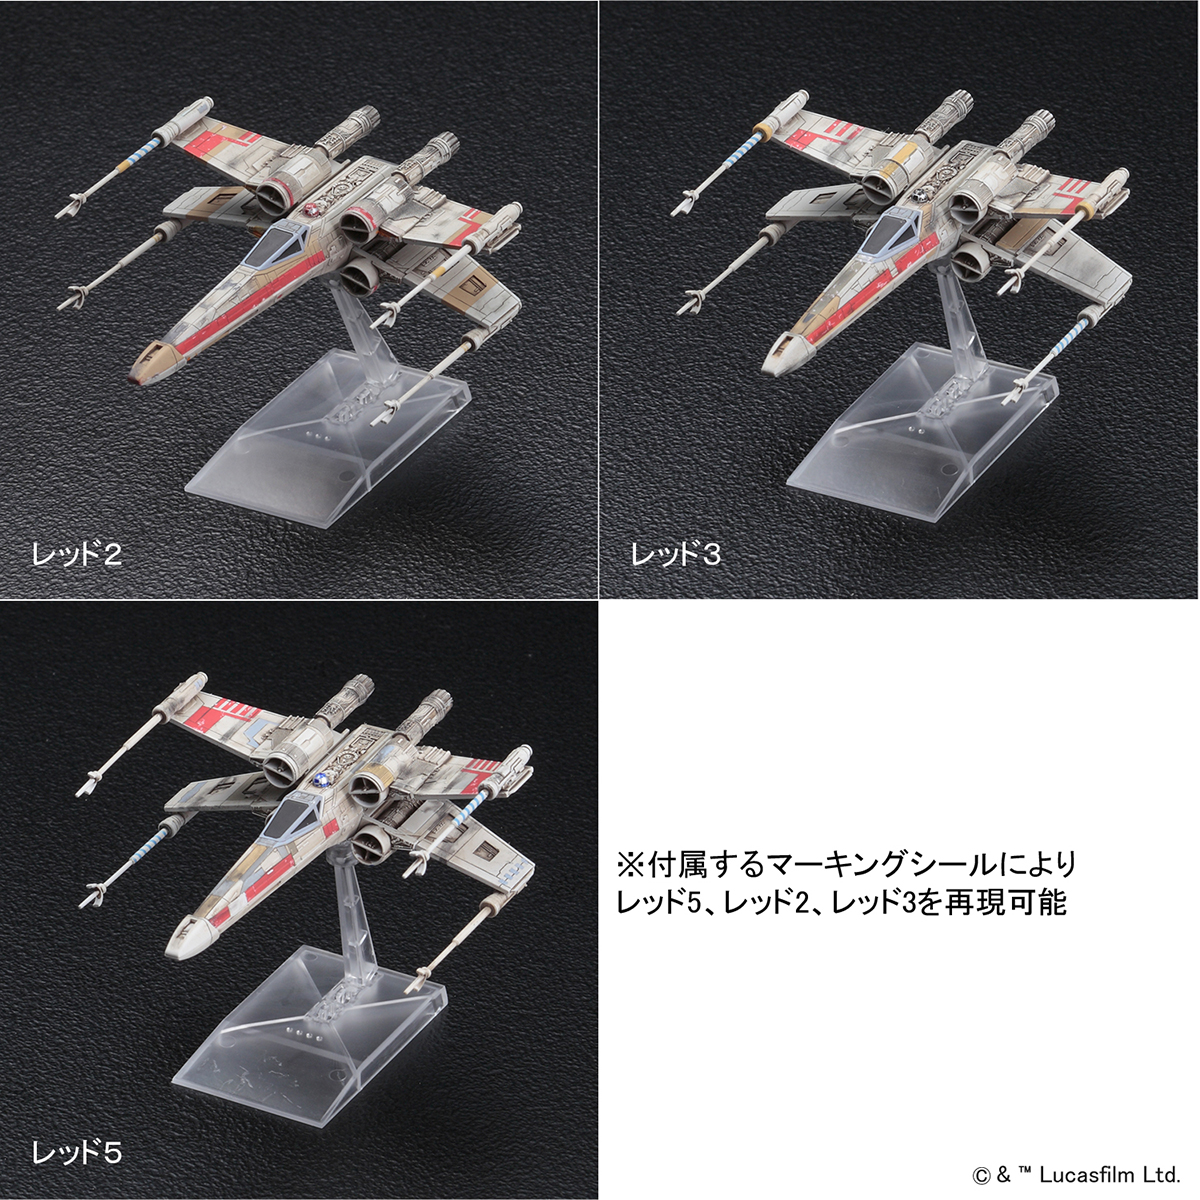 Details about   Bandai Star Wars Death Star Attack Set Model Kit 1/144th Scale Free Shipping 